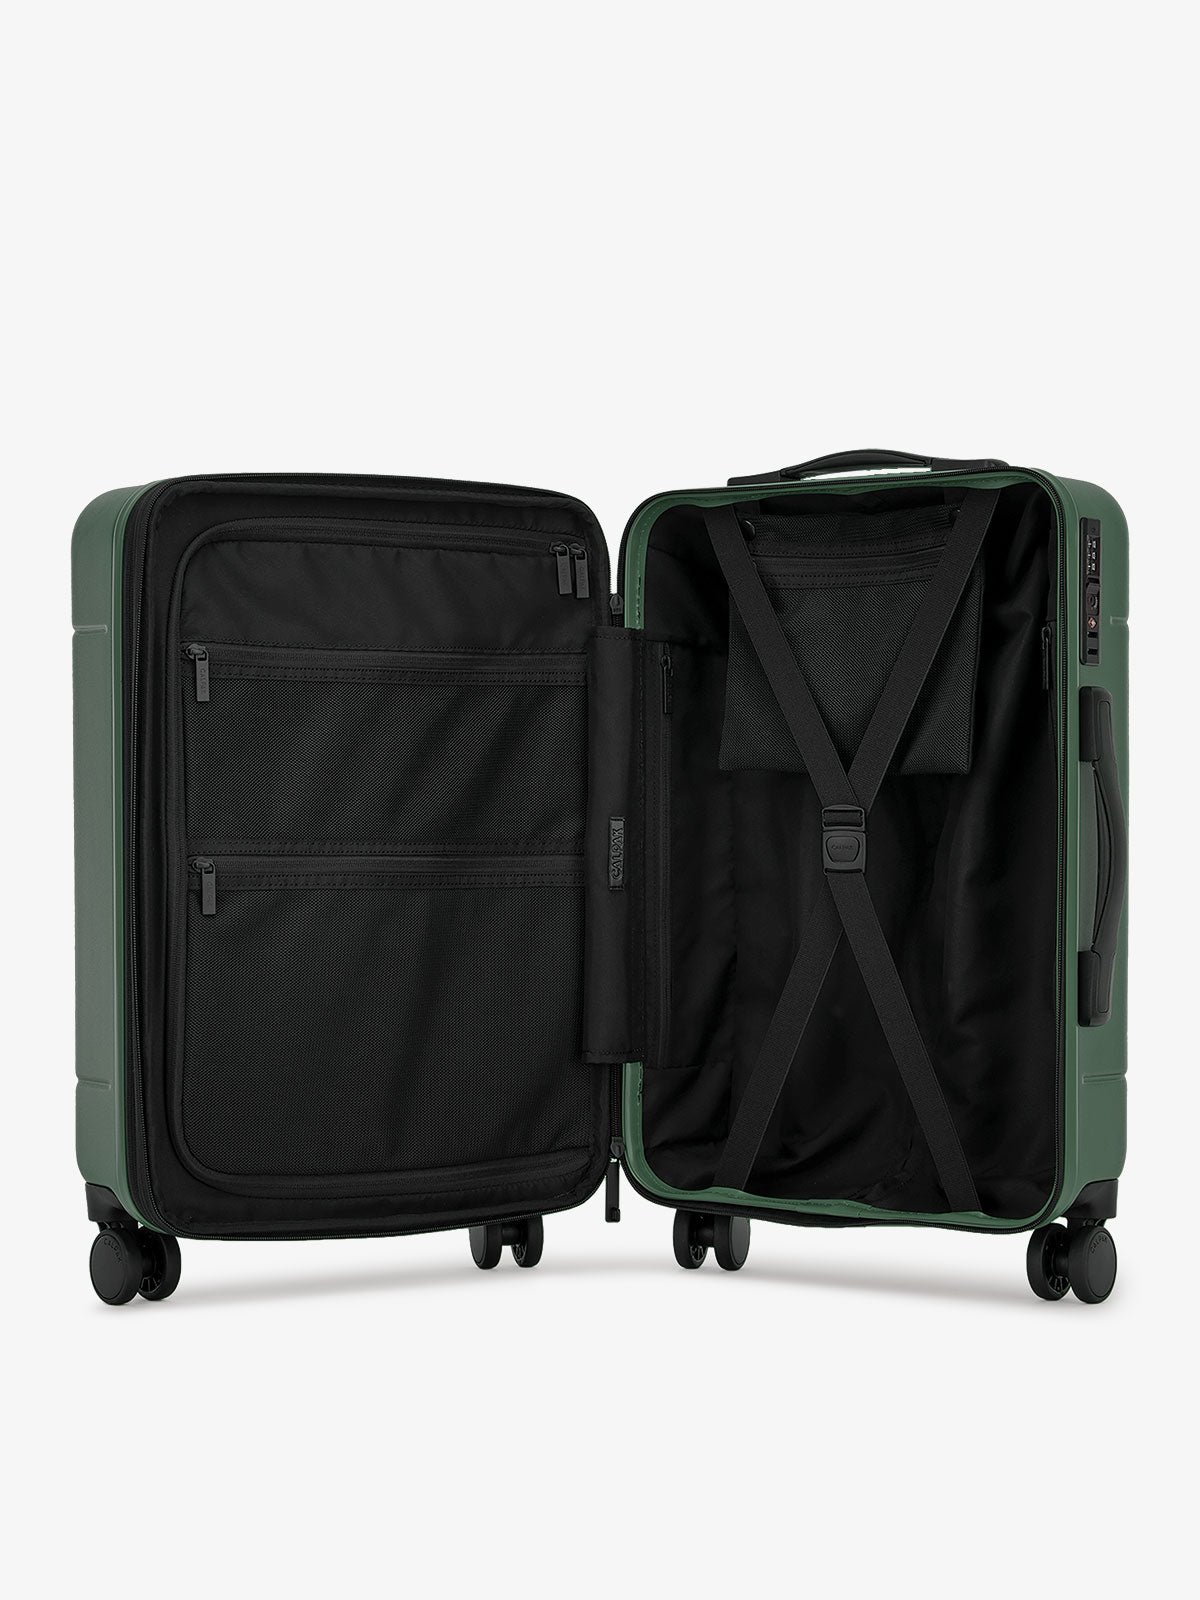 Interior of emerald green CALPAK Hue Medium Luggage with front pocket and compression straps